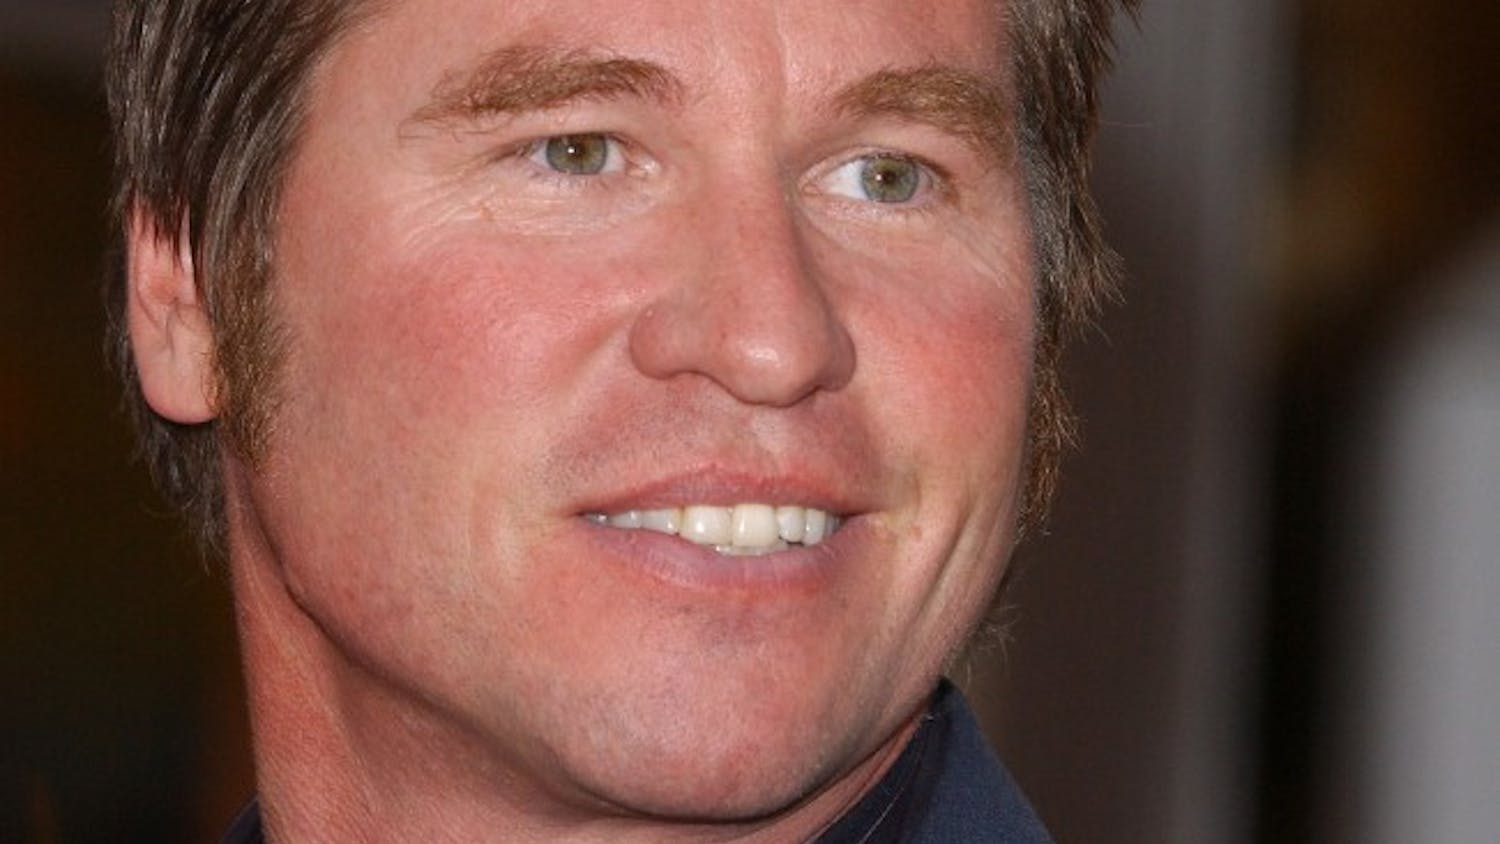 KRT STAND ALONE ENTERTAINMENT PHOTO SLUGGED: SPIDERMAN2 KRT PHOTOGRAPH BY LIONEL HAHN/ABACA PRESS (June 23) Val Kilmer attends the "Spider-Man 2" premiere at the Mann Village Theatre in Los Angeles, California, on Tuesday, June 22, 2004. (nk) 2004 